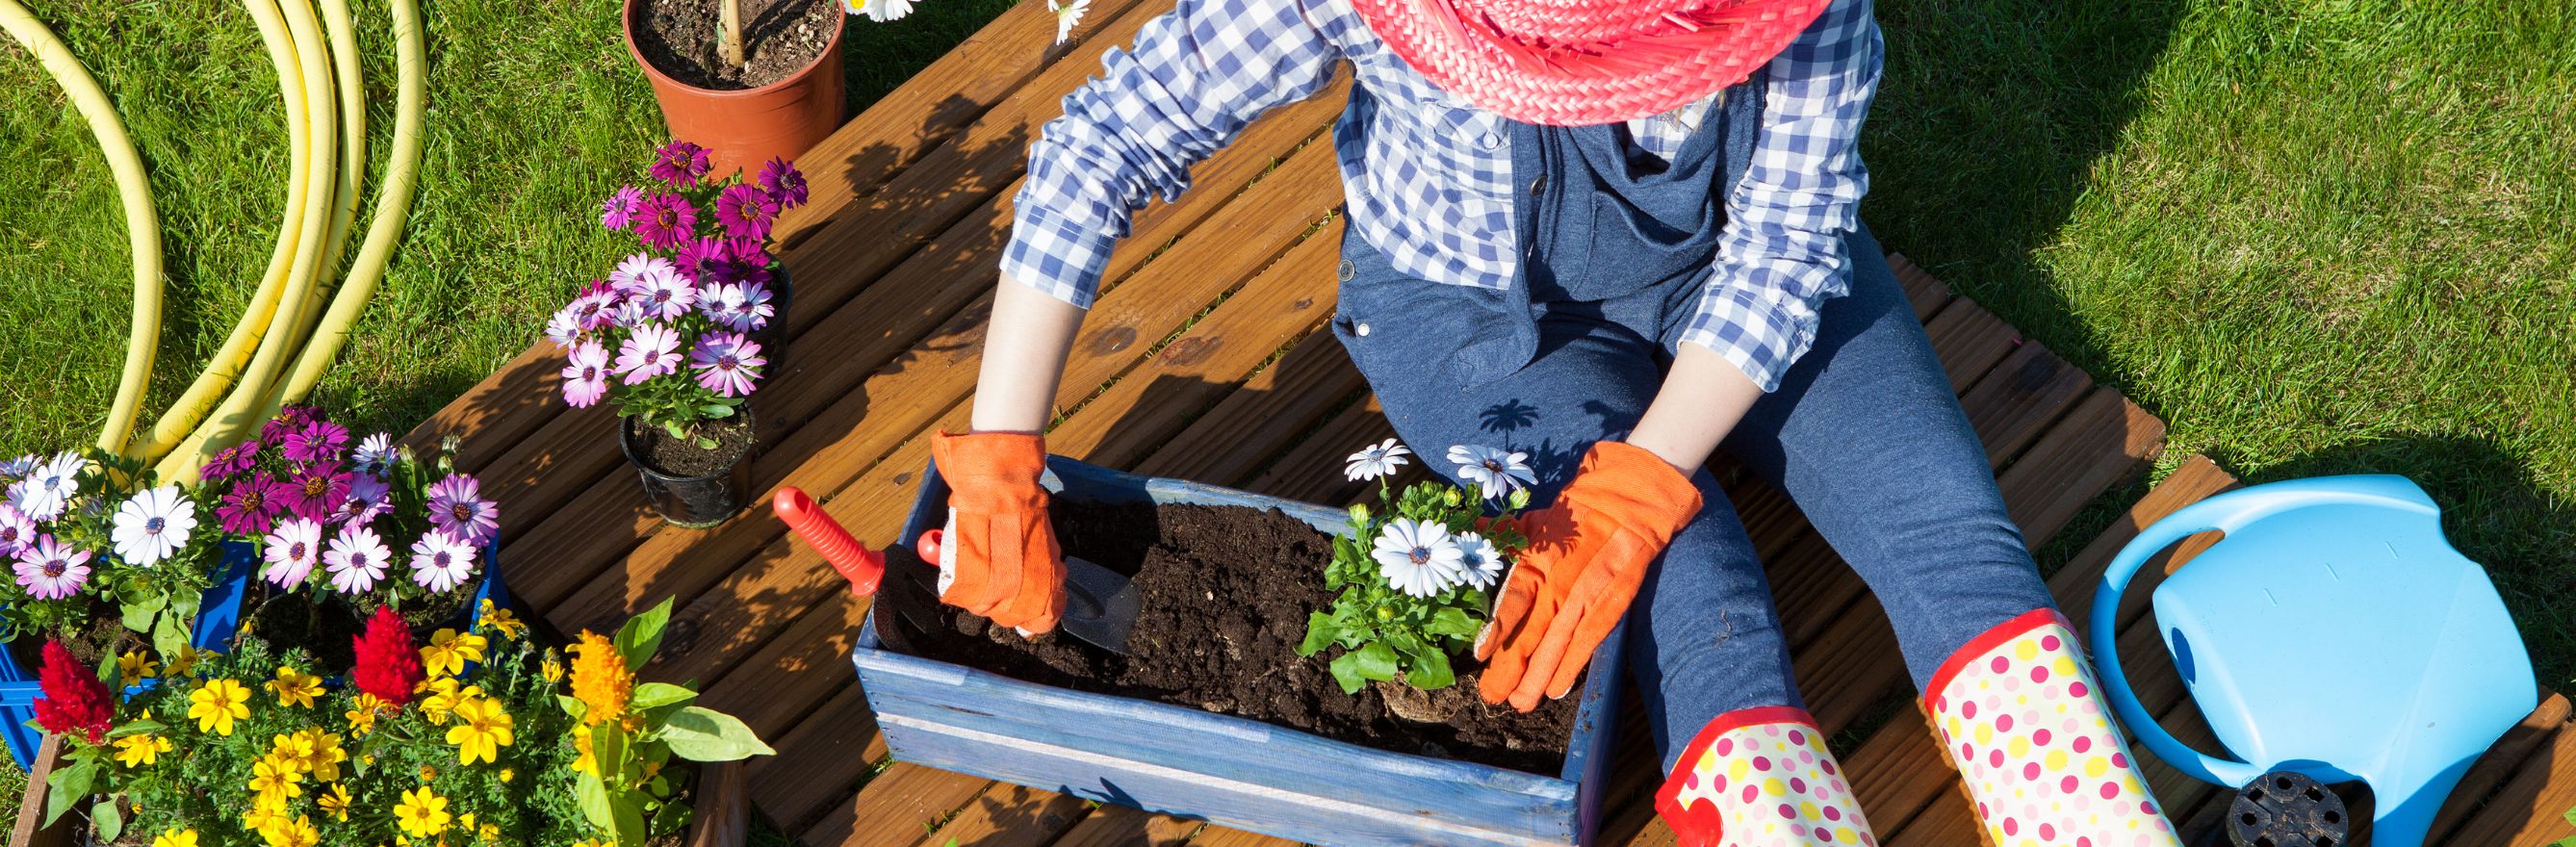 Gardening, source of well being